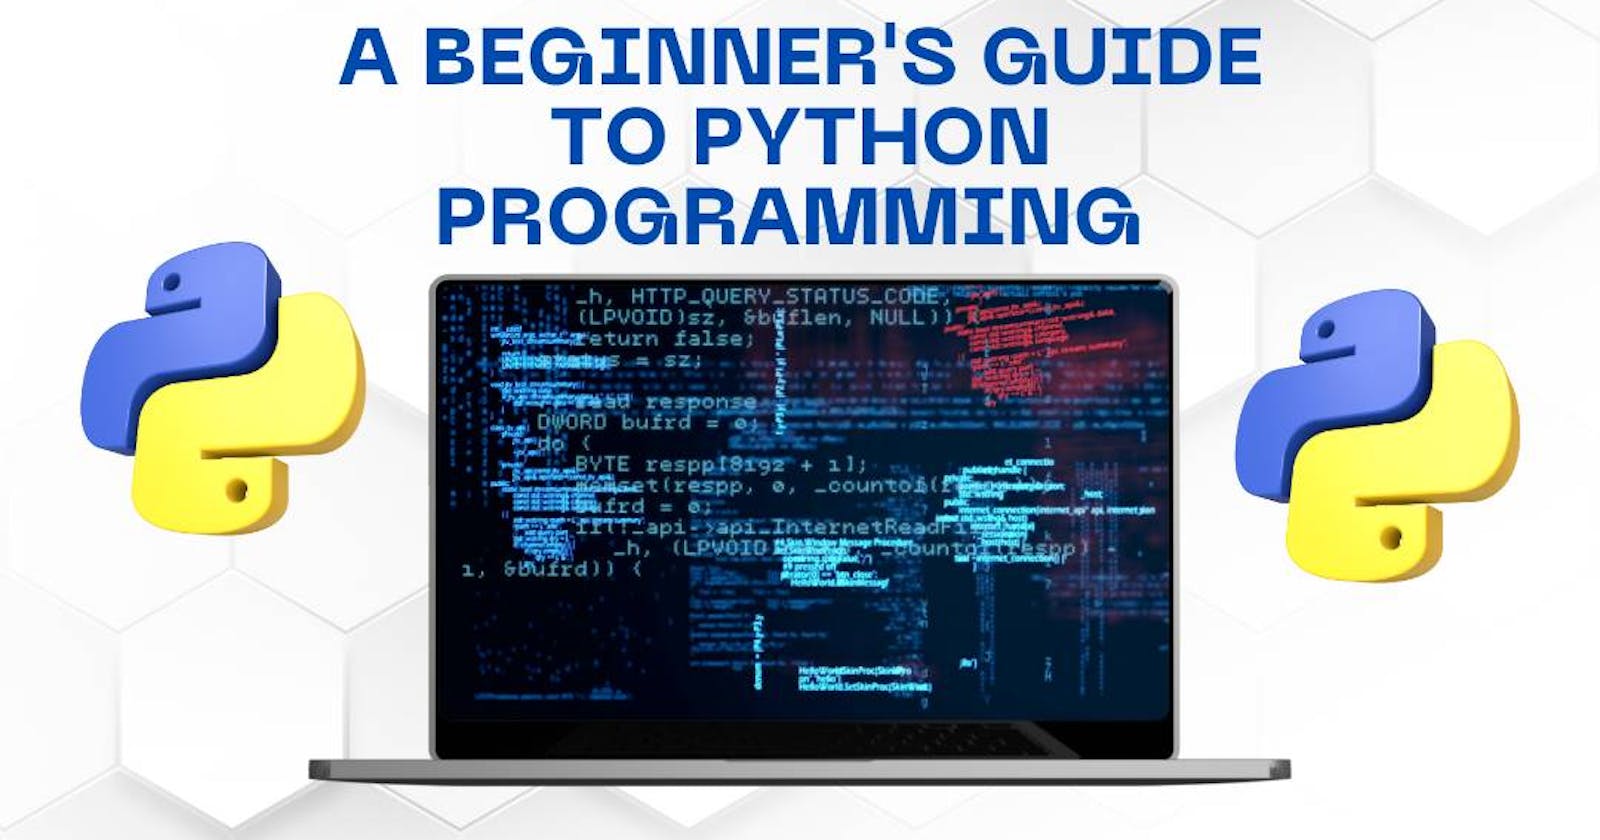 A beginner's guide to python programming